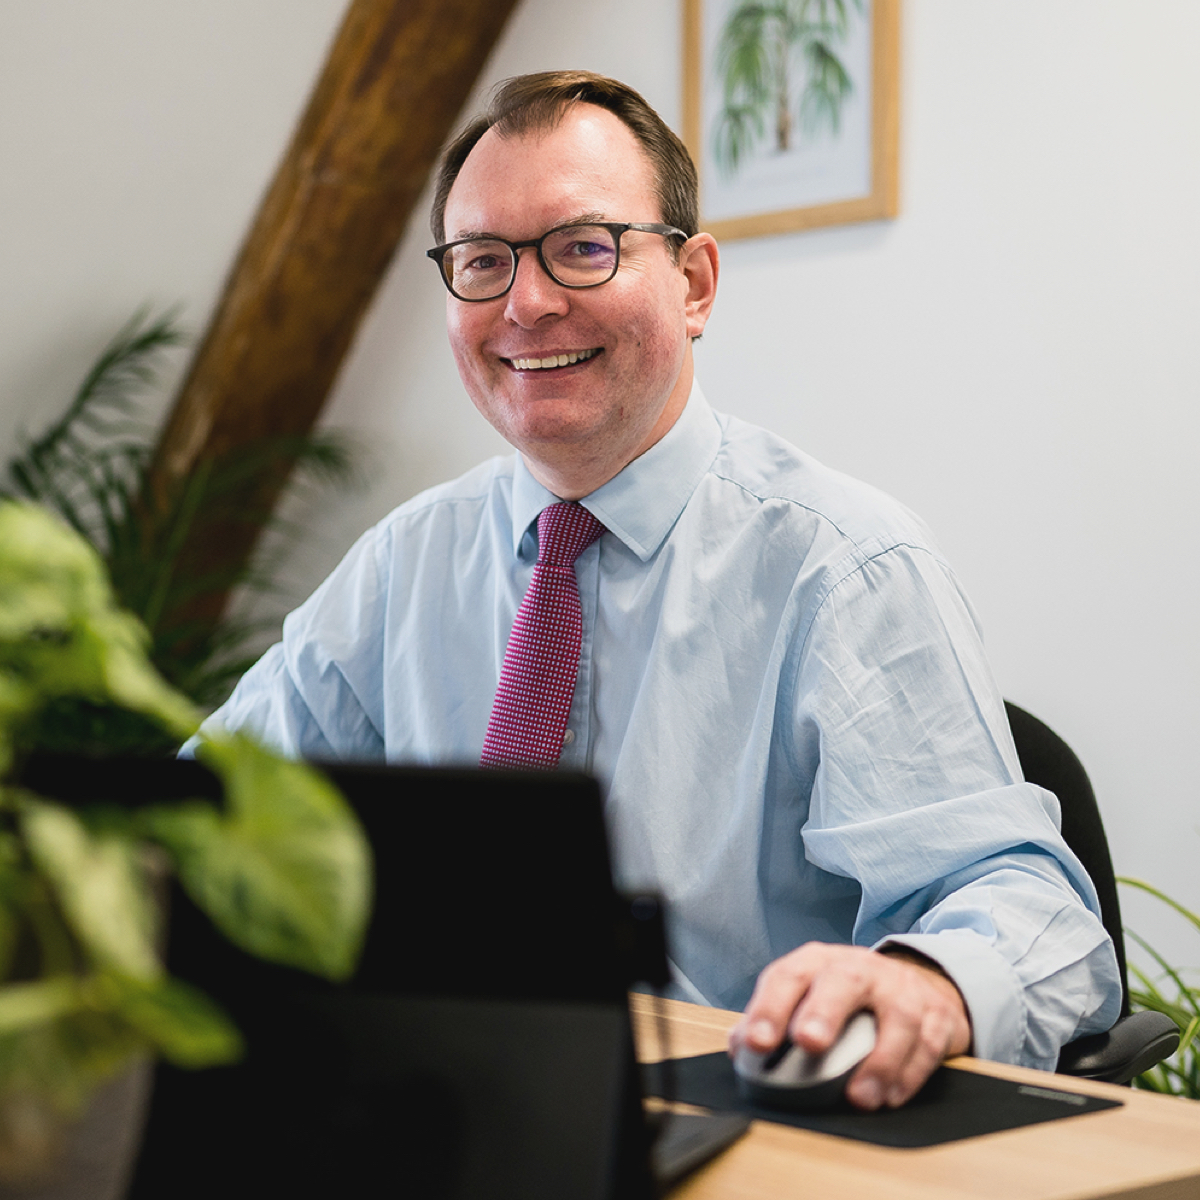 Paul Willans smiling while he works at his desk at AJB Wealth